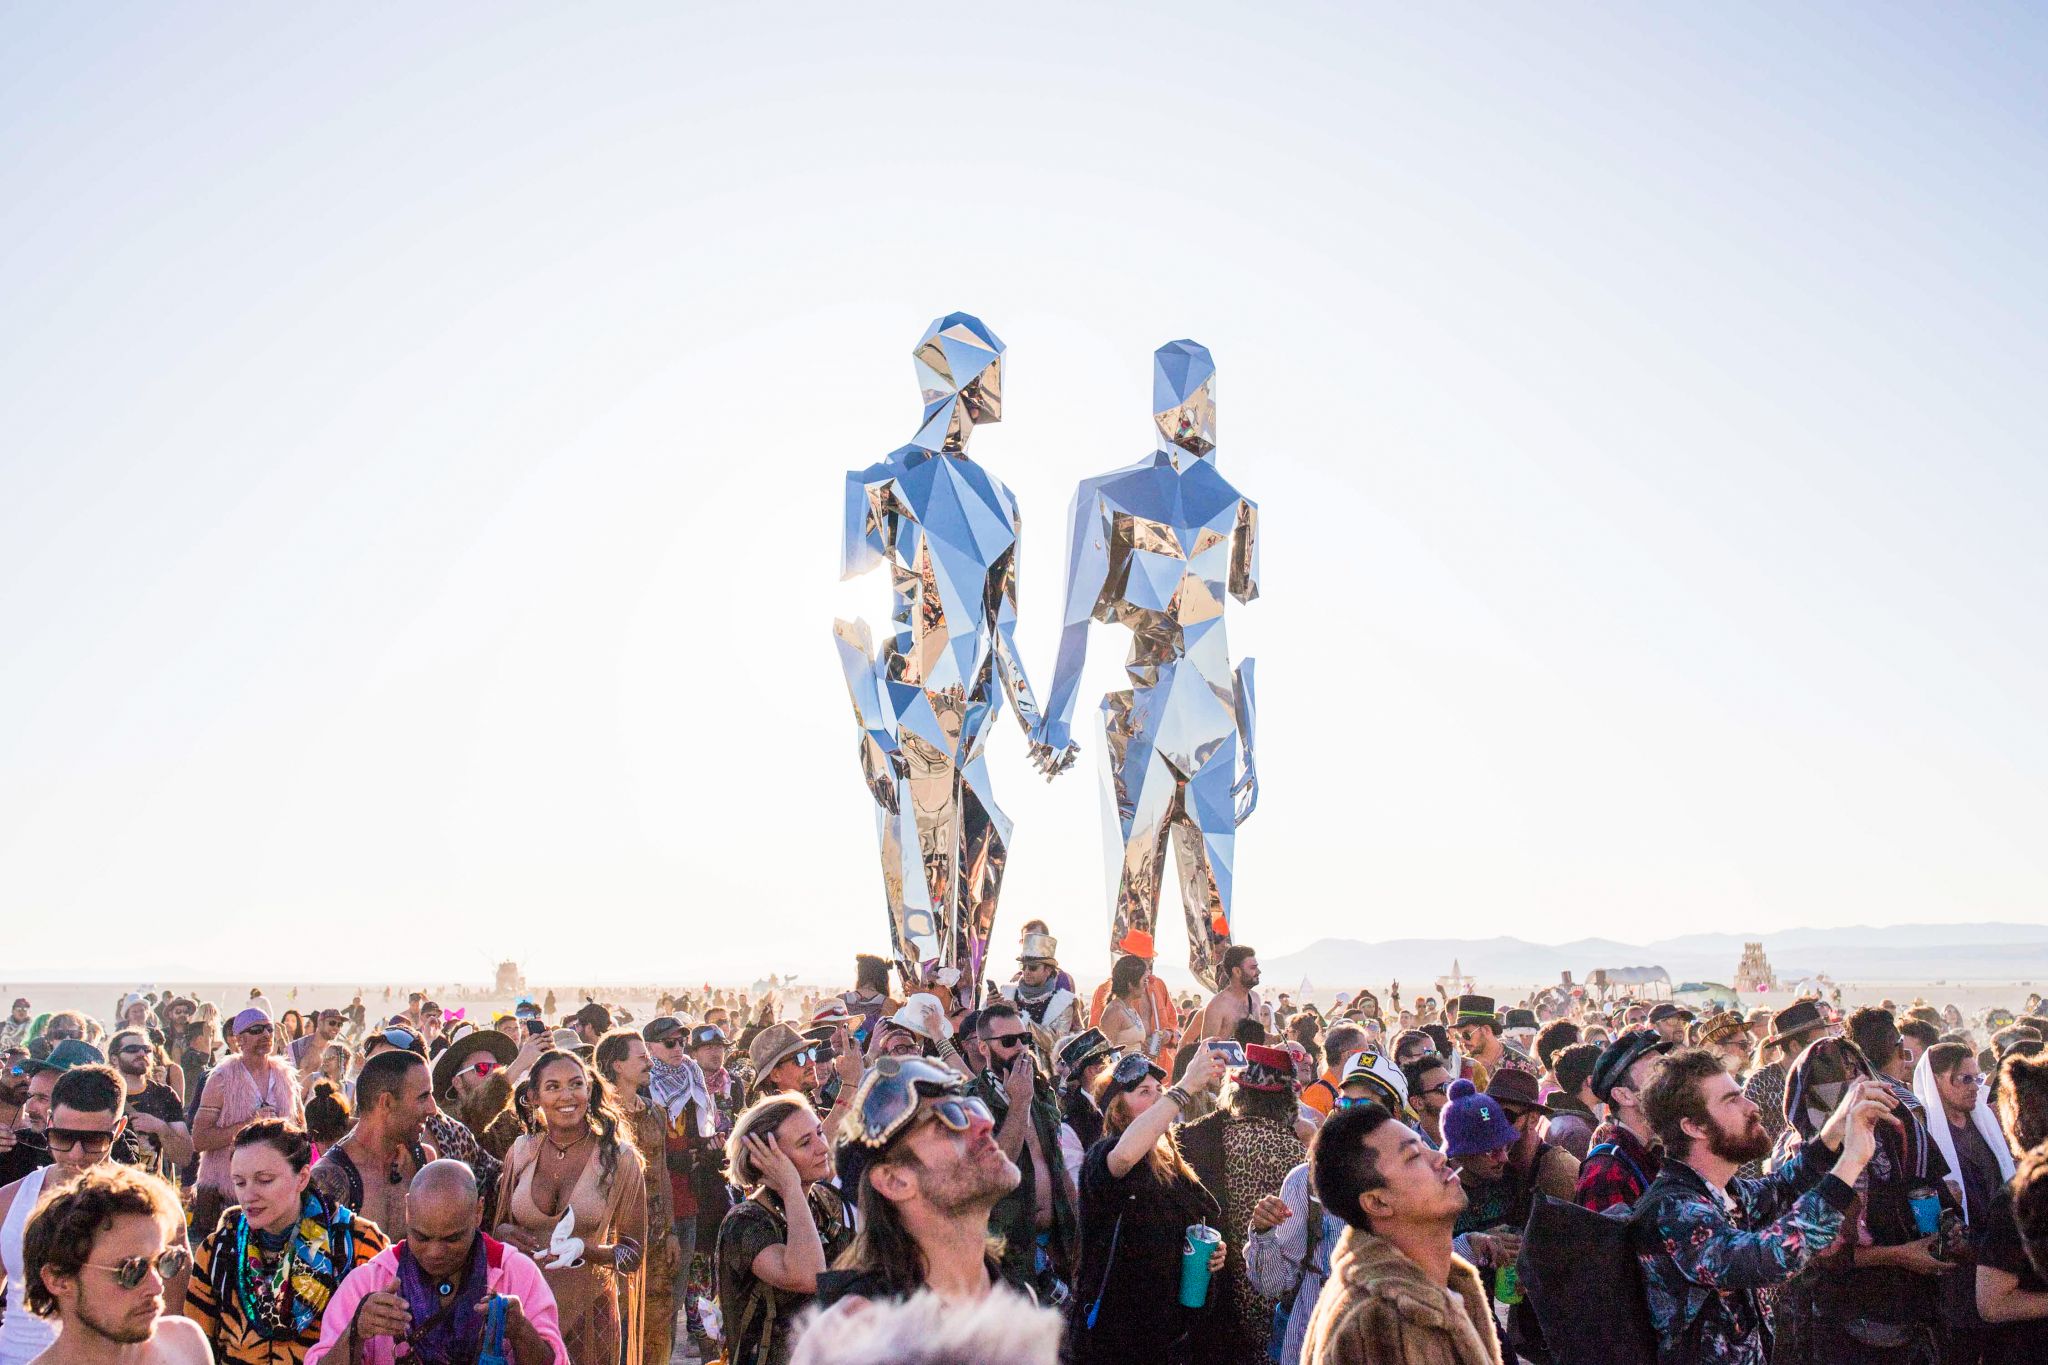 Burning Man announces ticket sale details for 2022 Nevada News